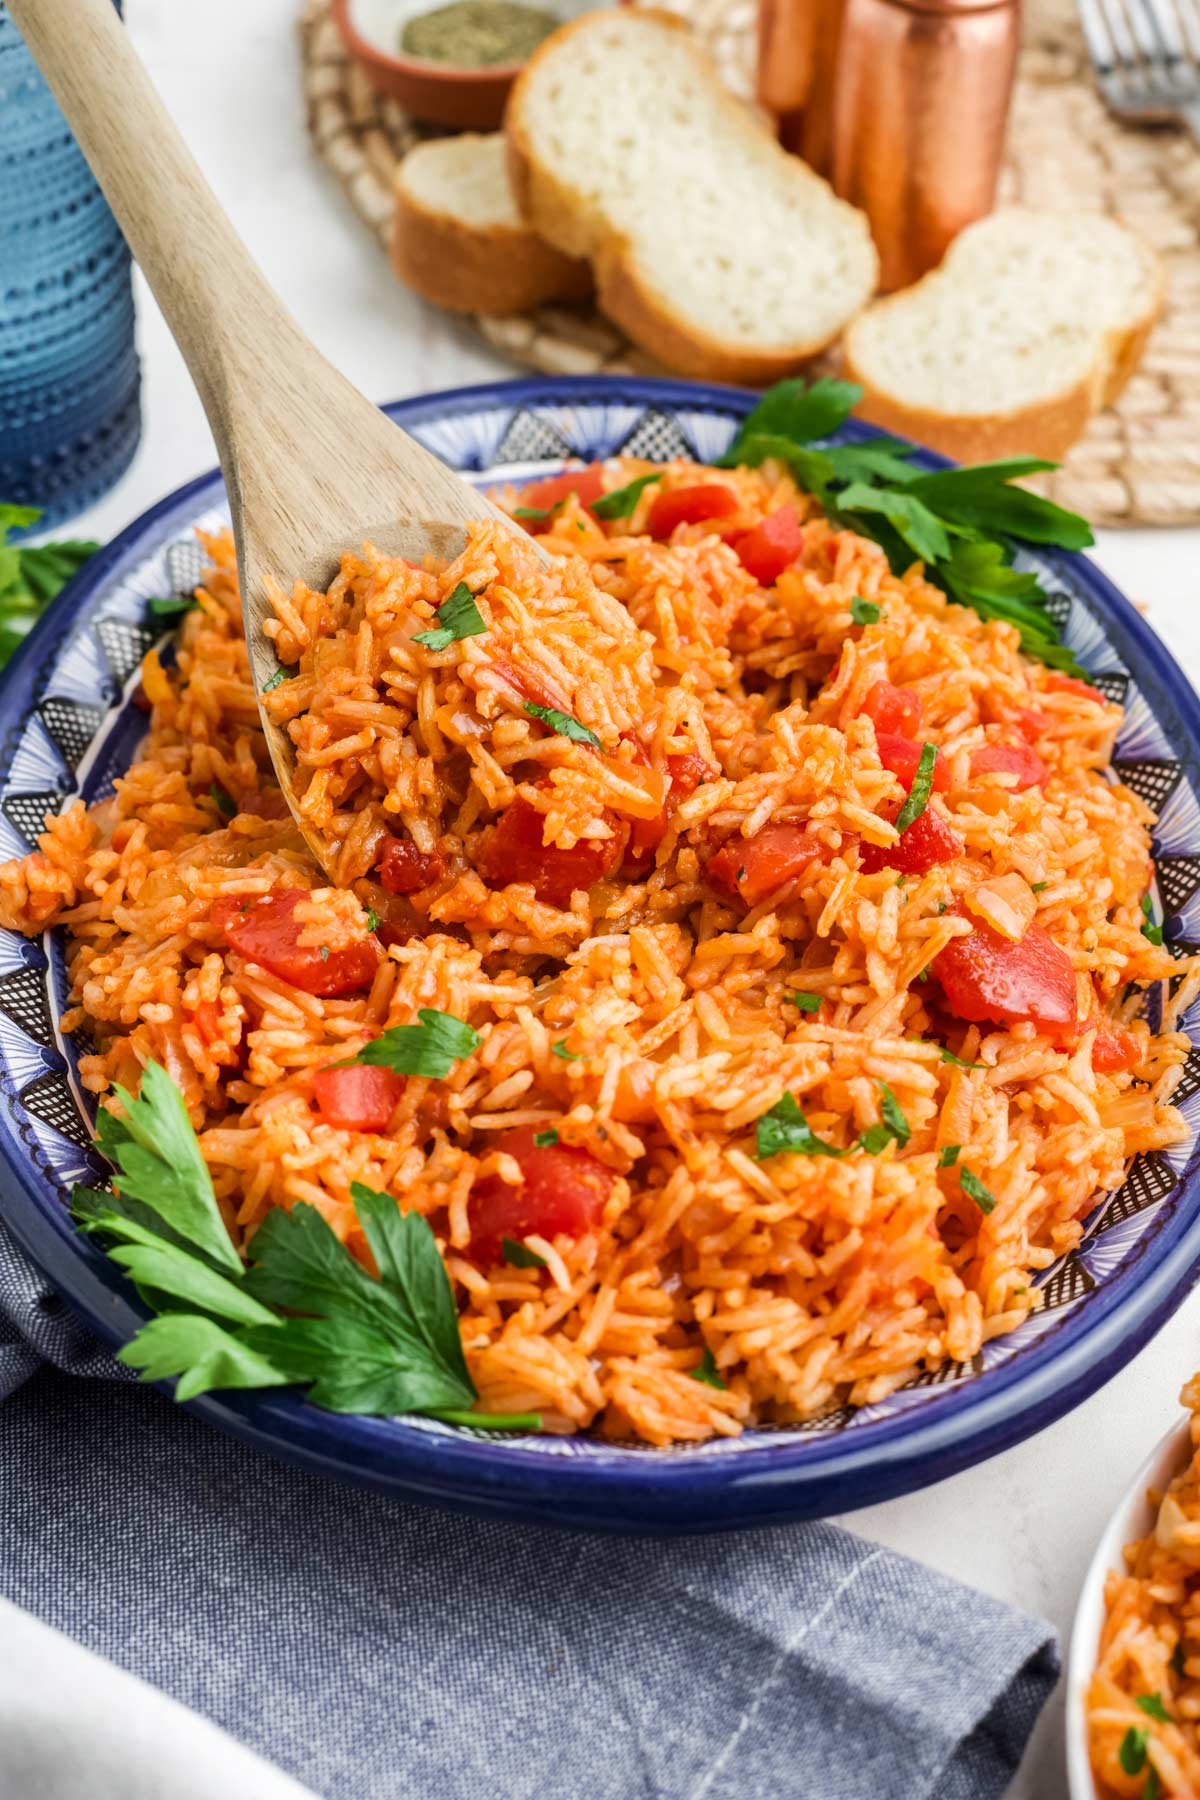 Tomato rice served up in a white and blue platter with a wooden spoon lifting up a bit.